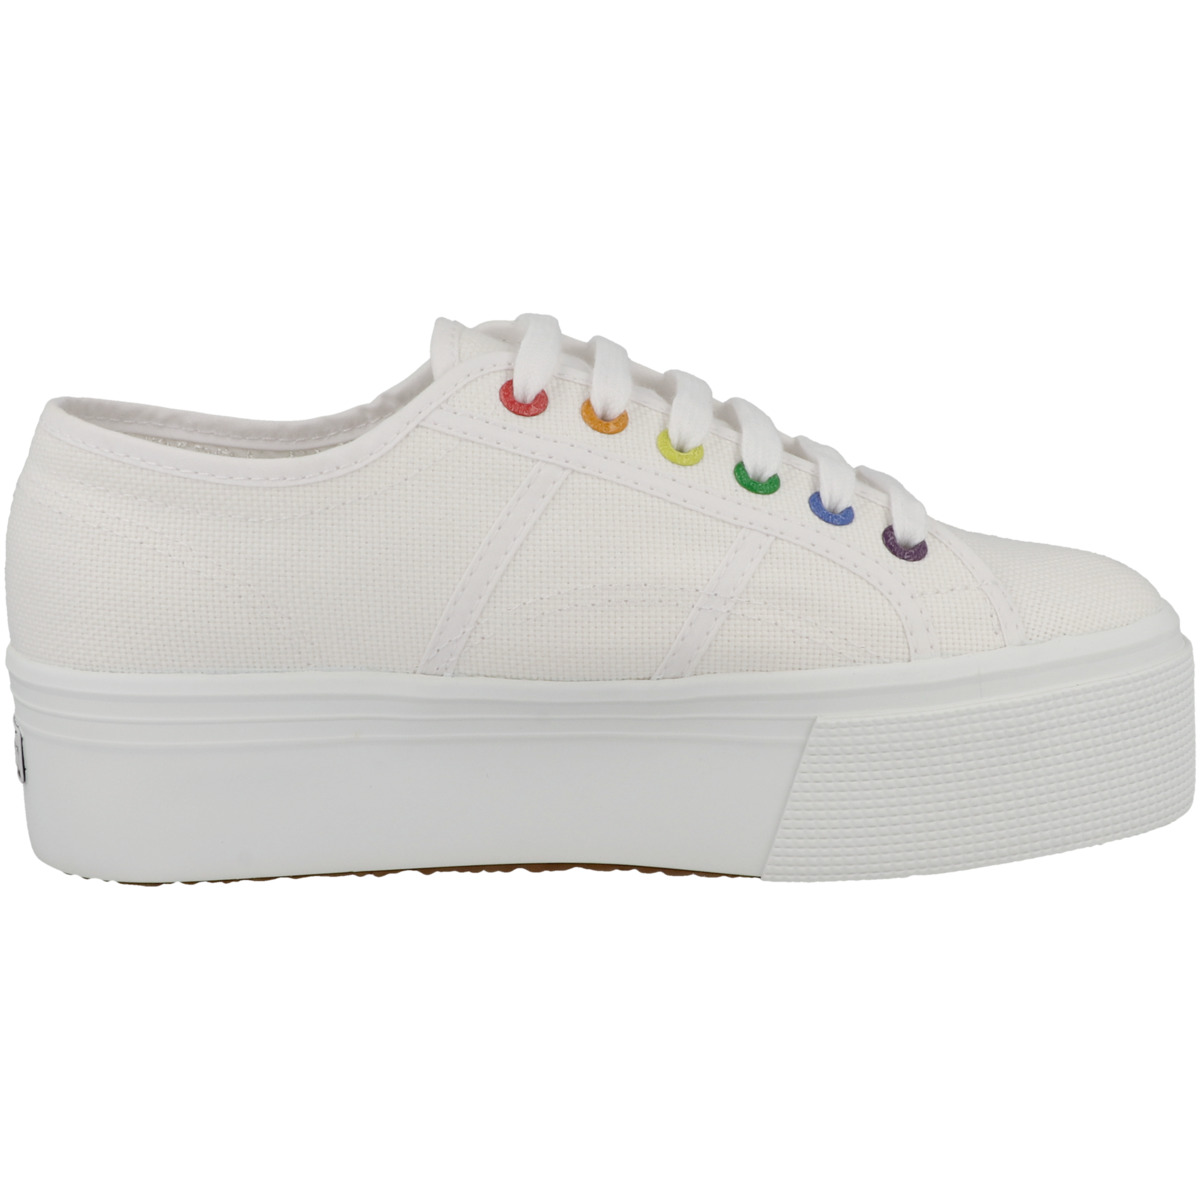 Superga 2790 Heart Outsole Patch Sneaker low